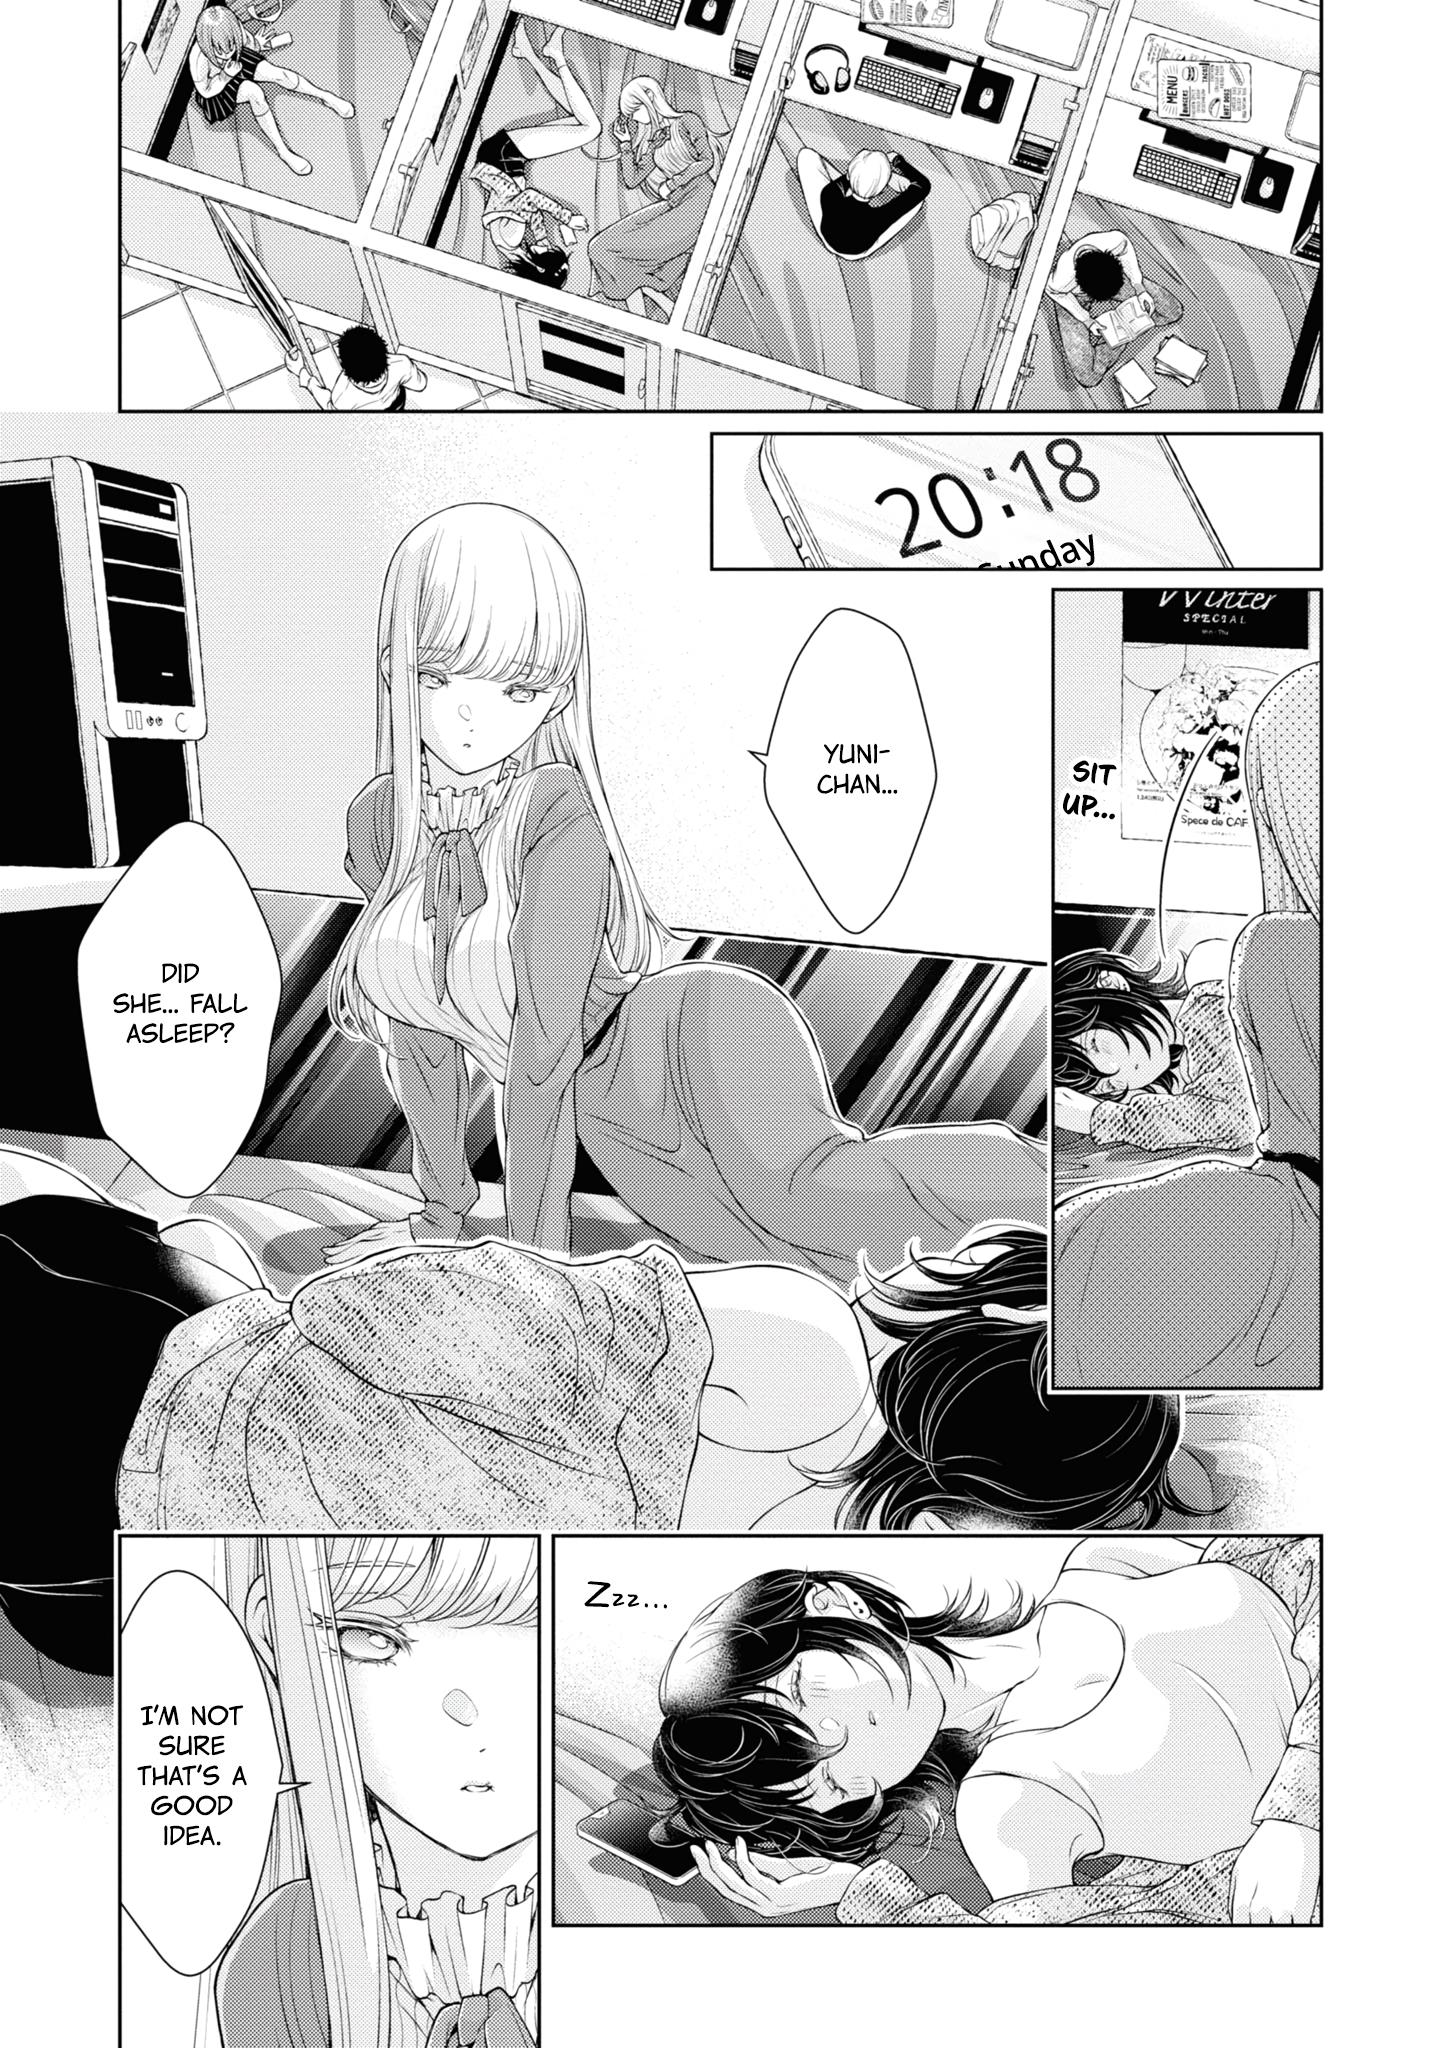 My Girlfriend’S Not Here Today Vol.1 Chapter 5.5: Afterword And Extra Pages Volume 1 - Picture 2